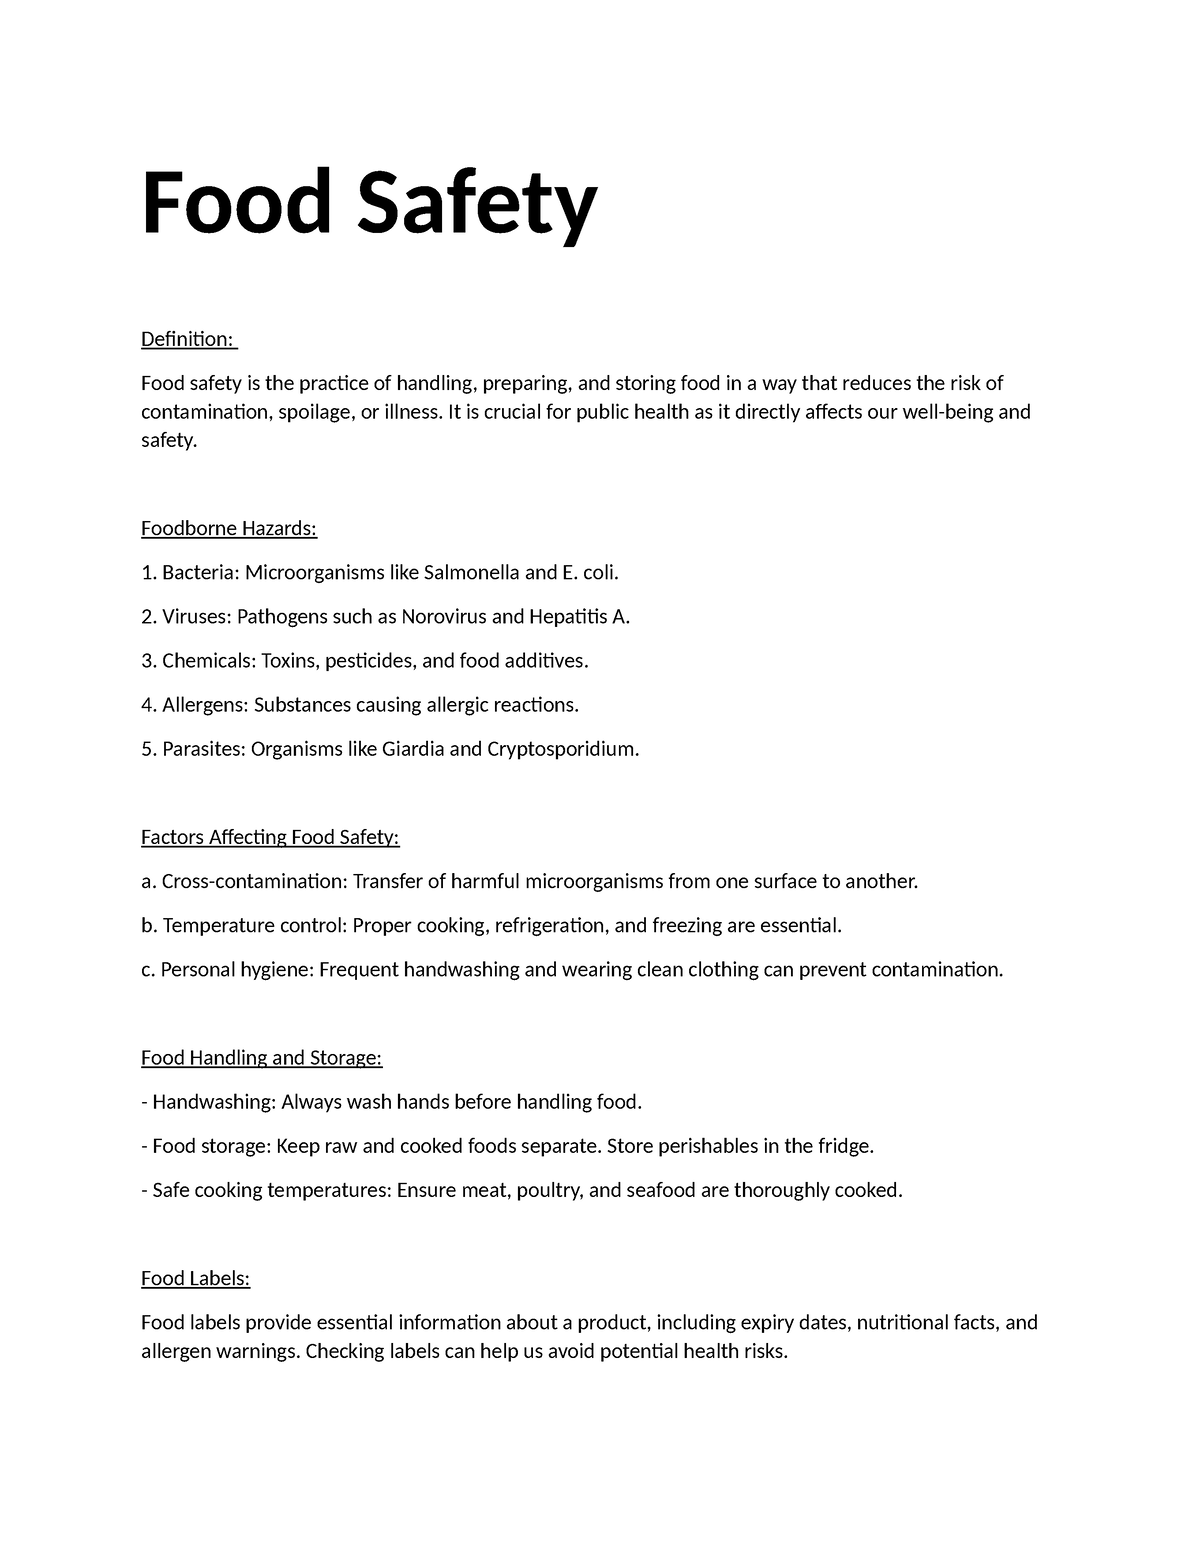 Food Safety - ffff - Food Safety Definition: Food safety is the ...